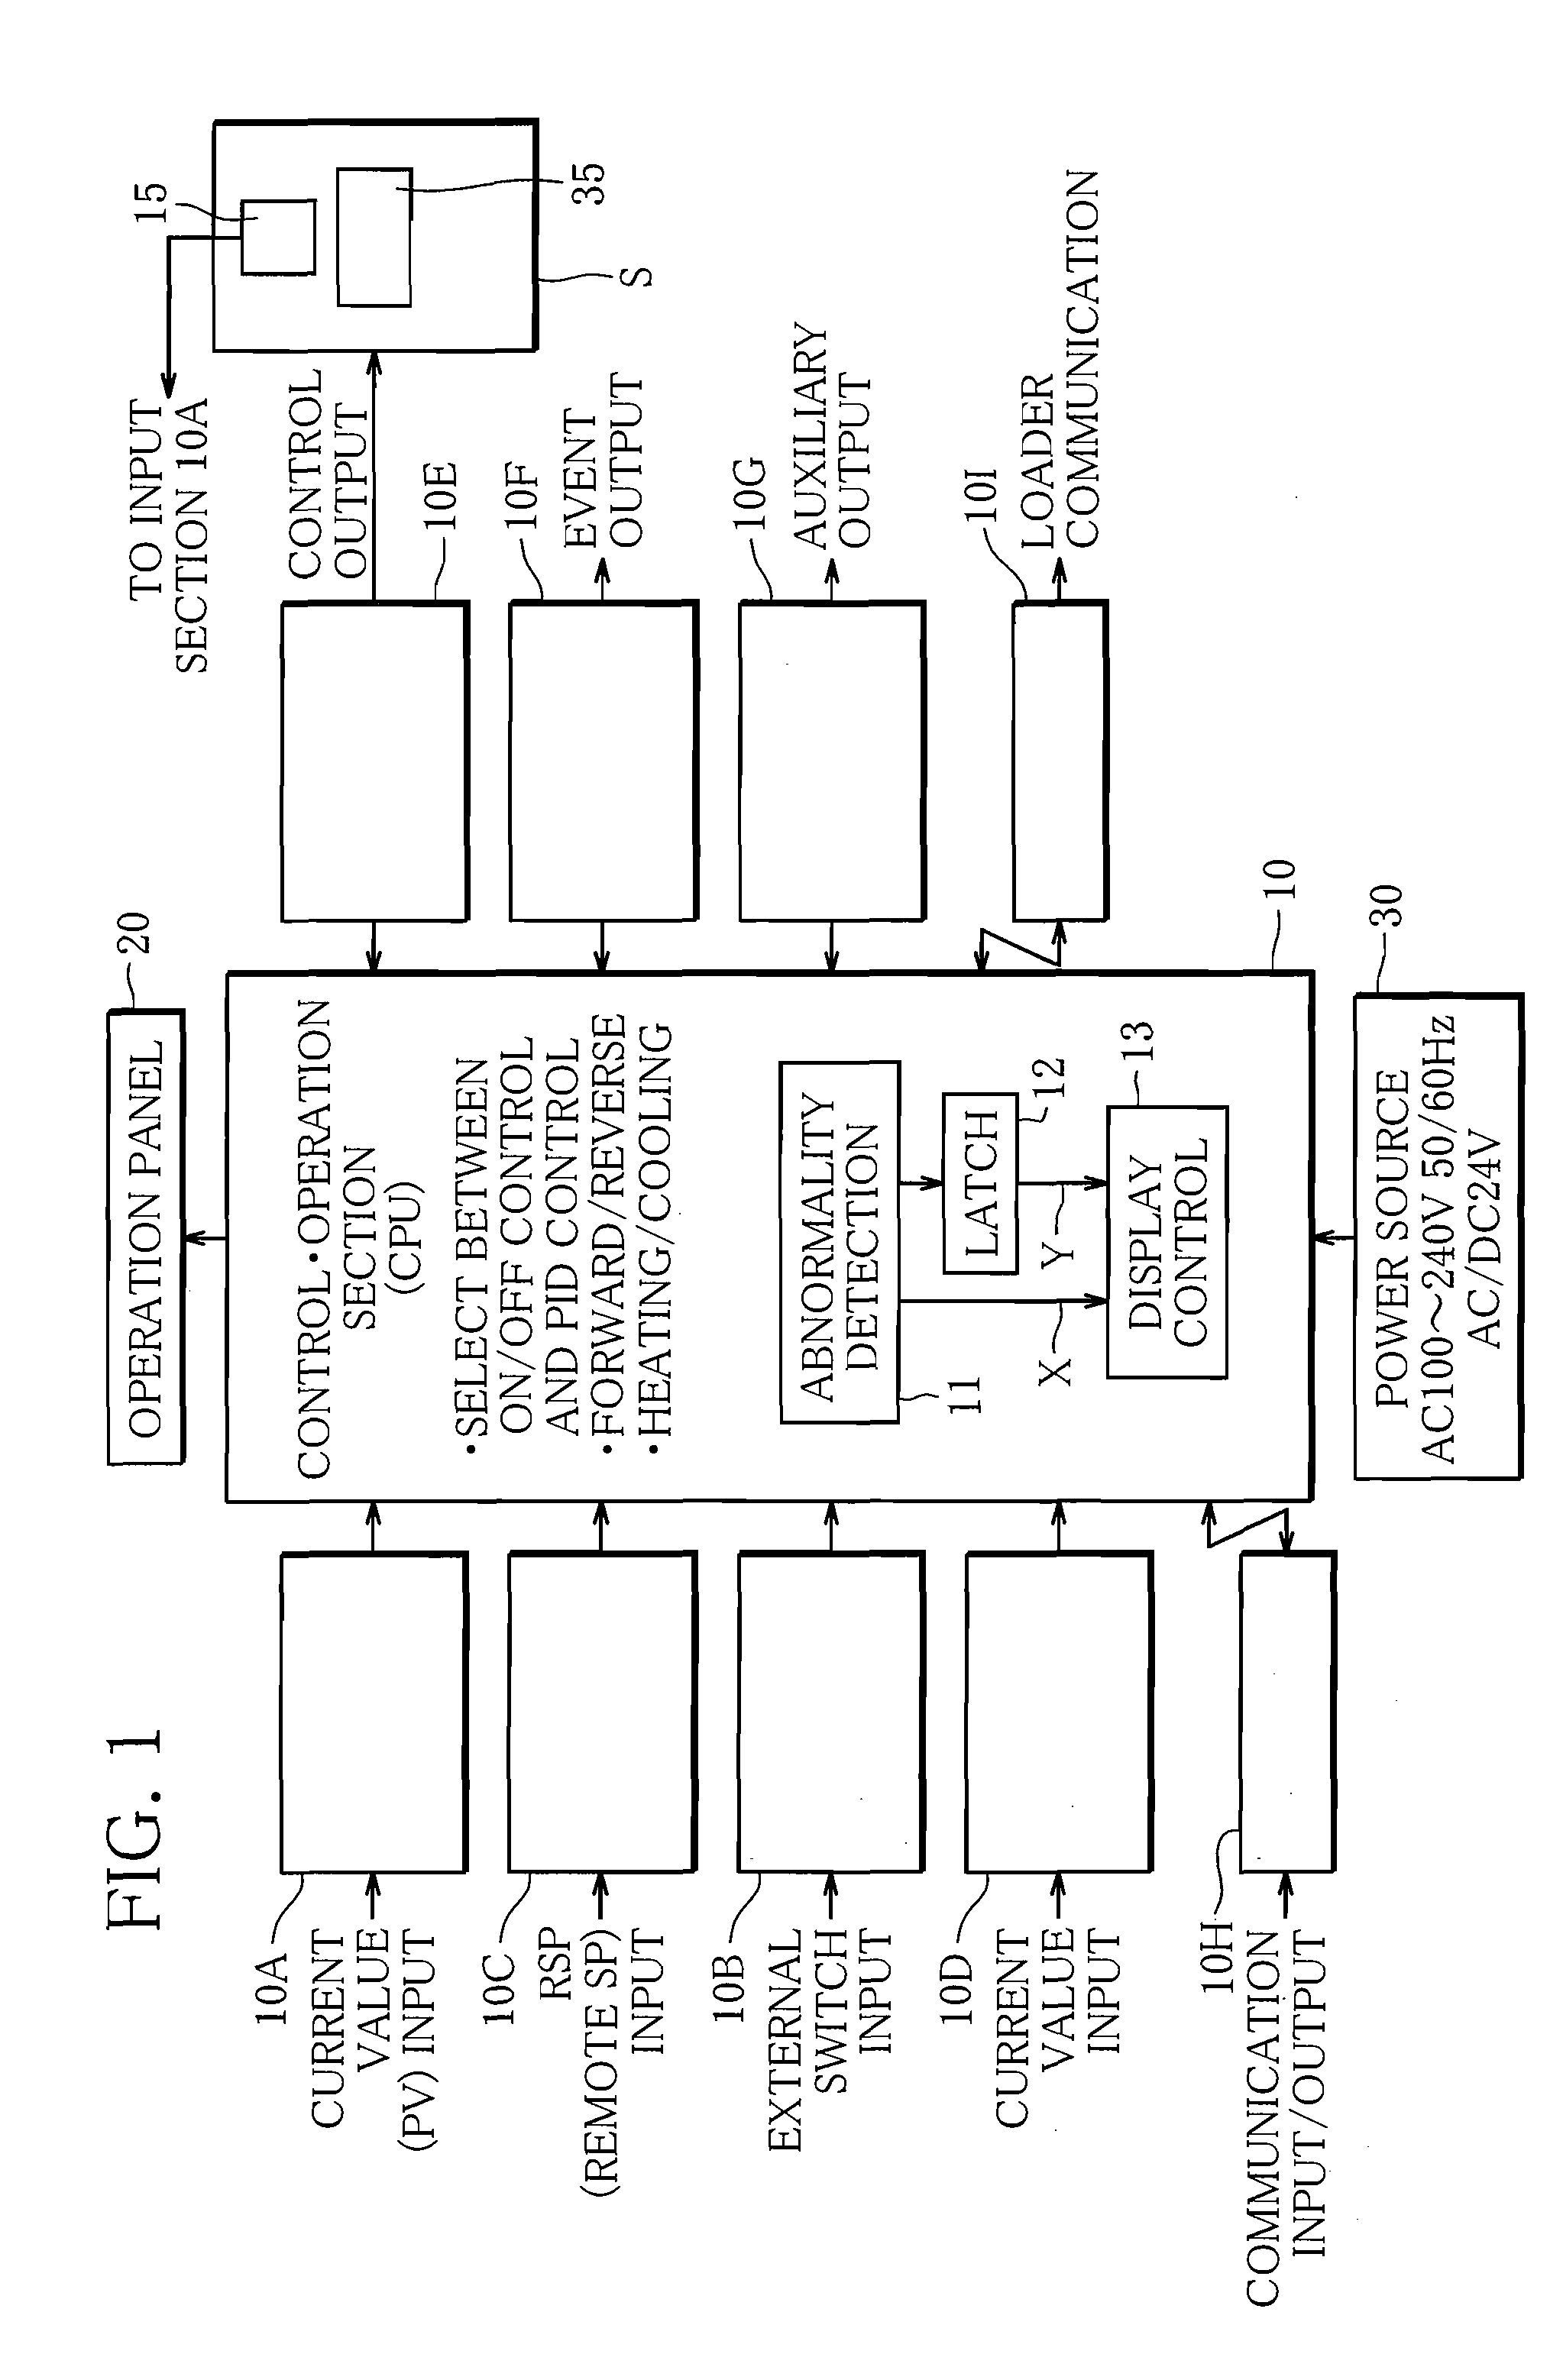 Monitoring system and temperature controller